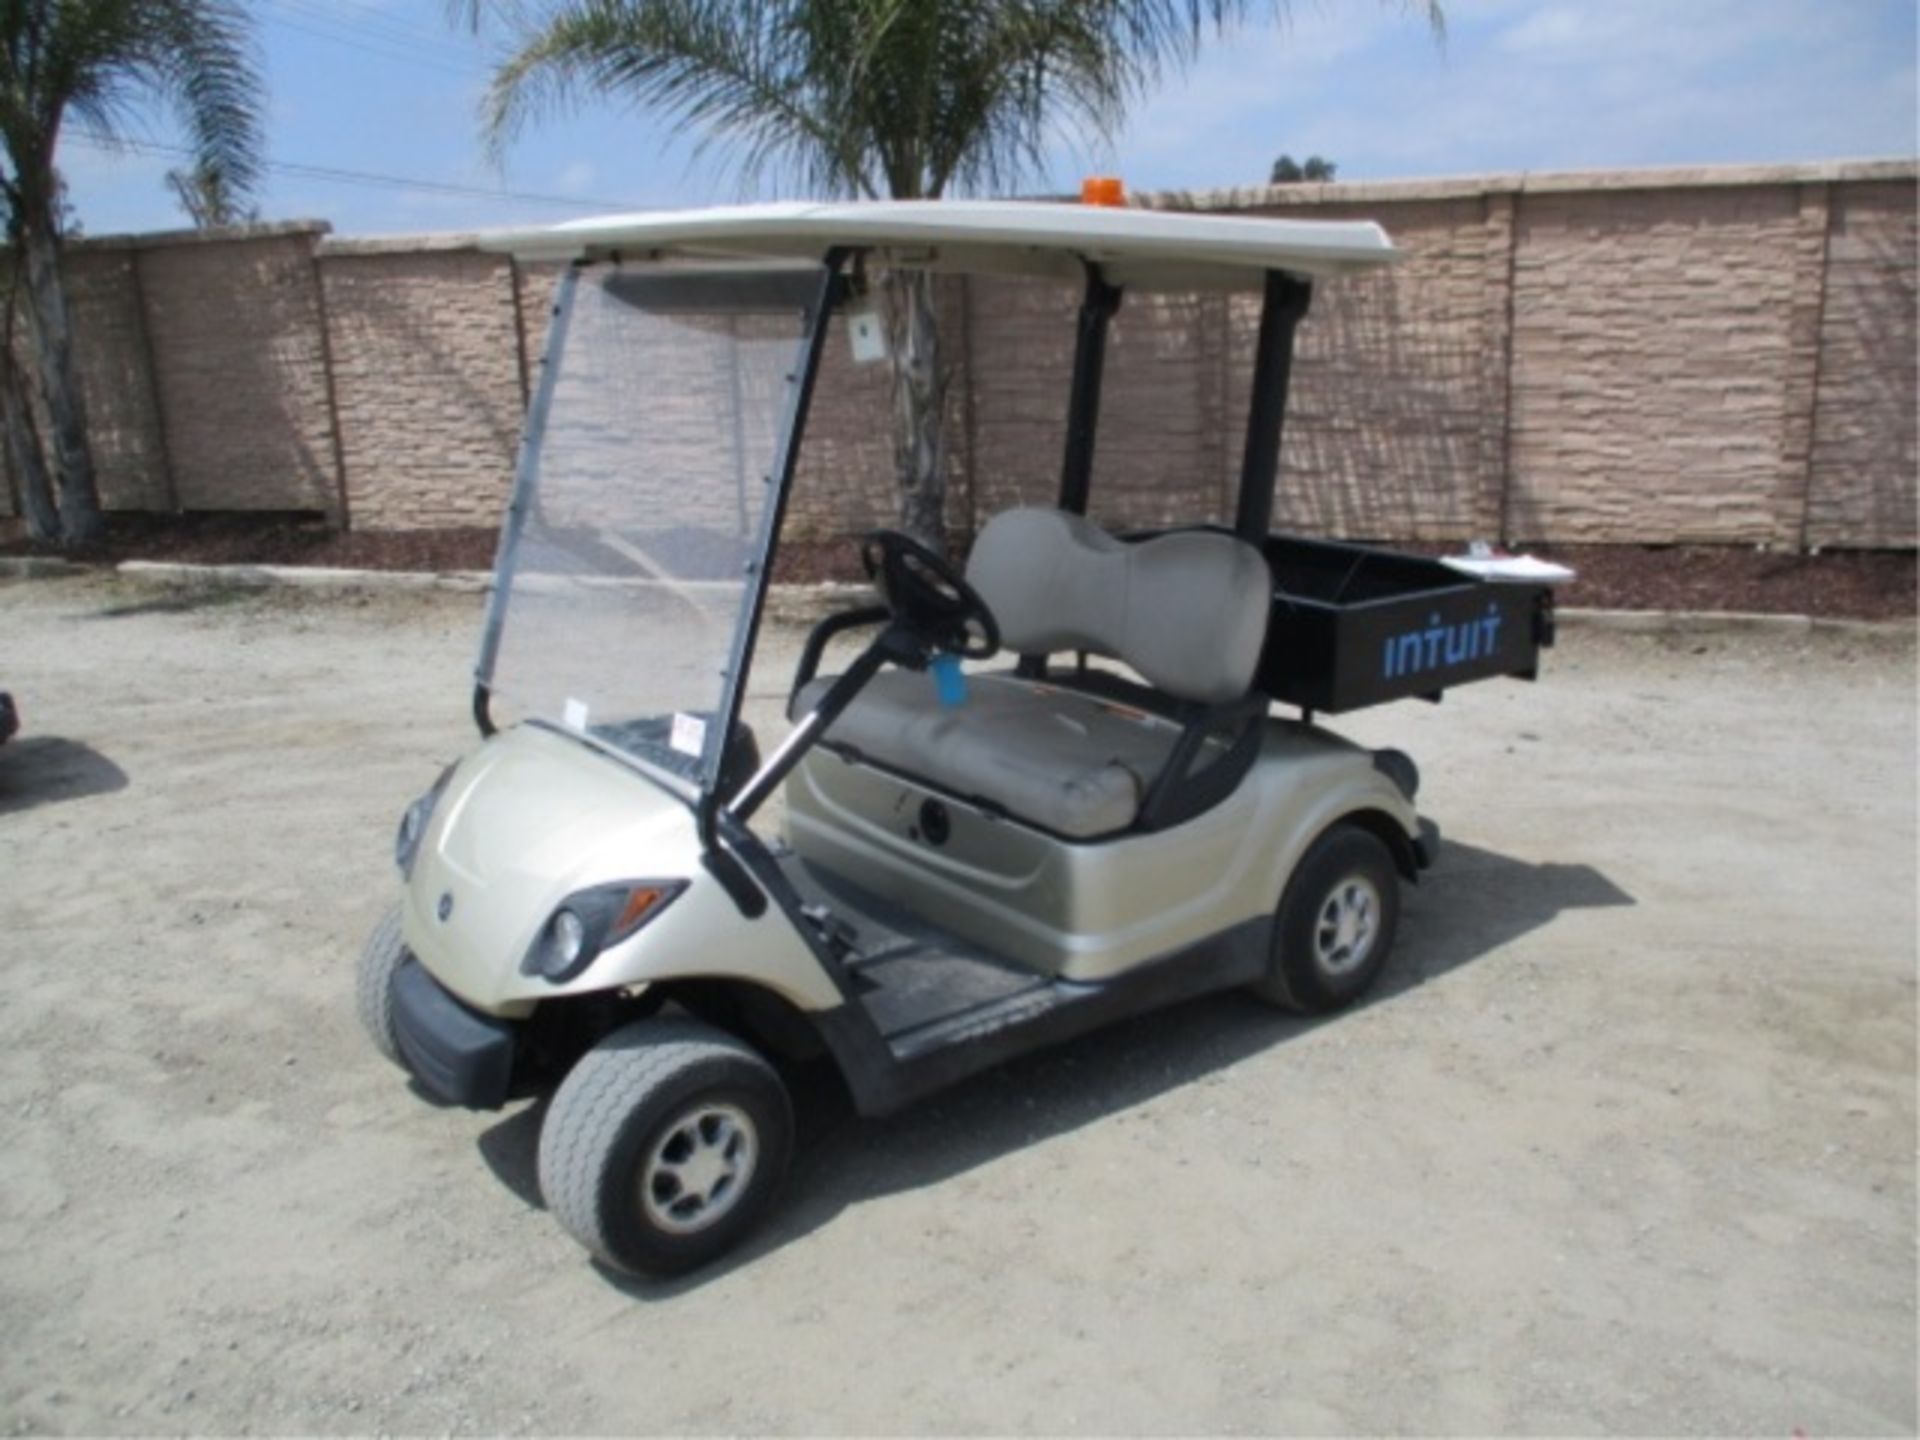 Yamaha Utility Golf Cart, Electric, Rear Metal Bed, Canopy, Includes Charger, S/N: JW1-F423610